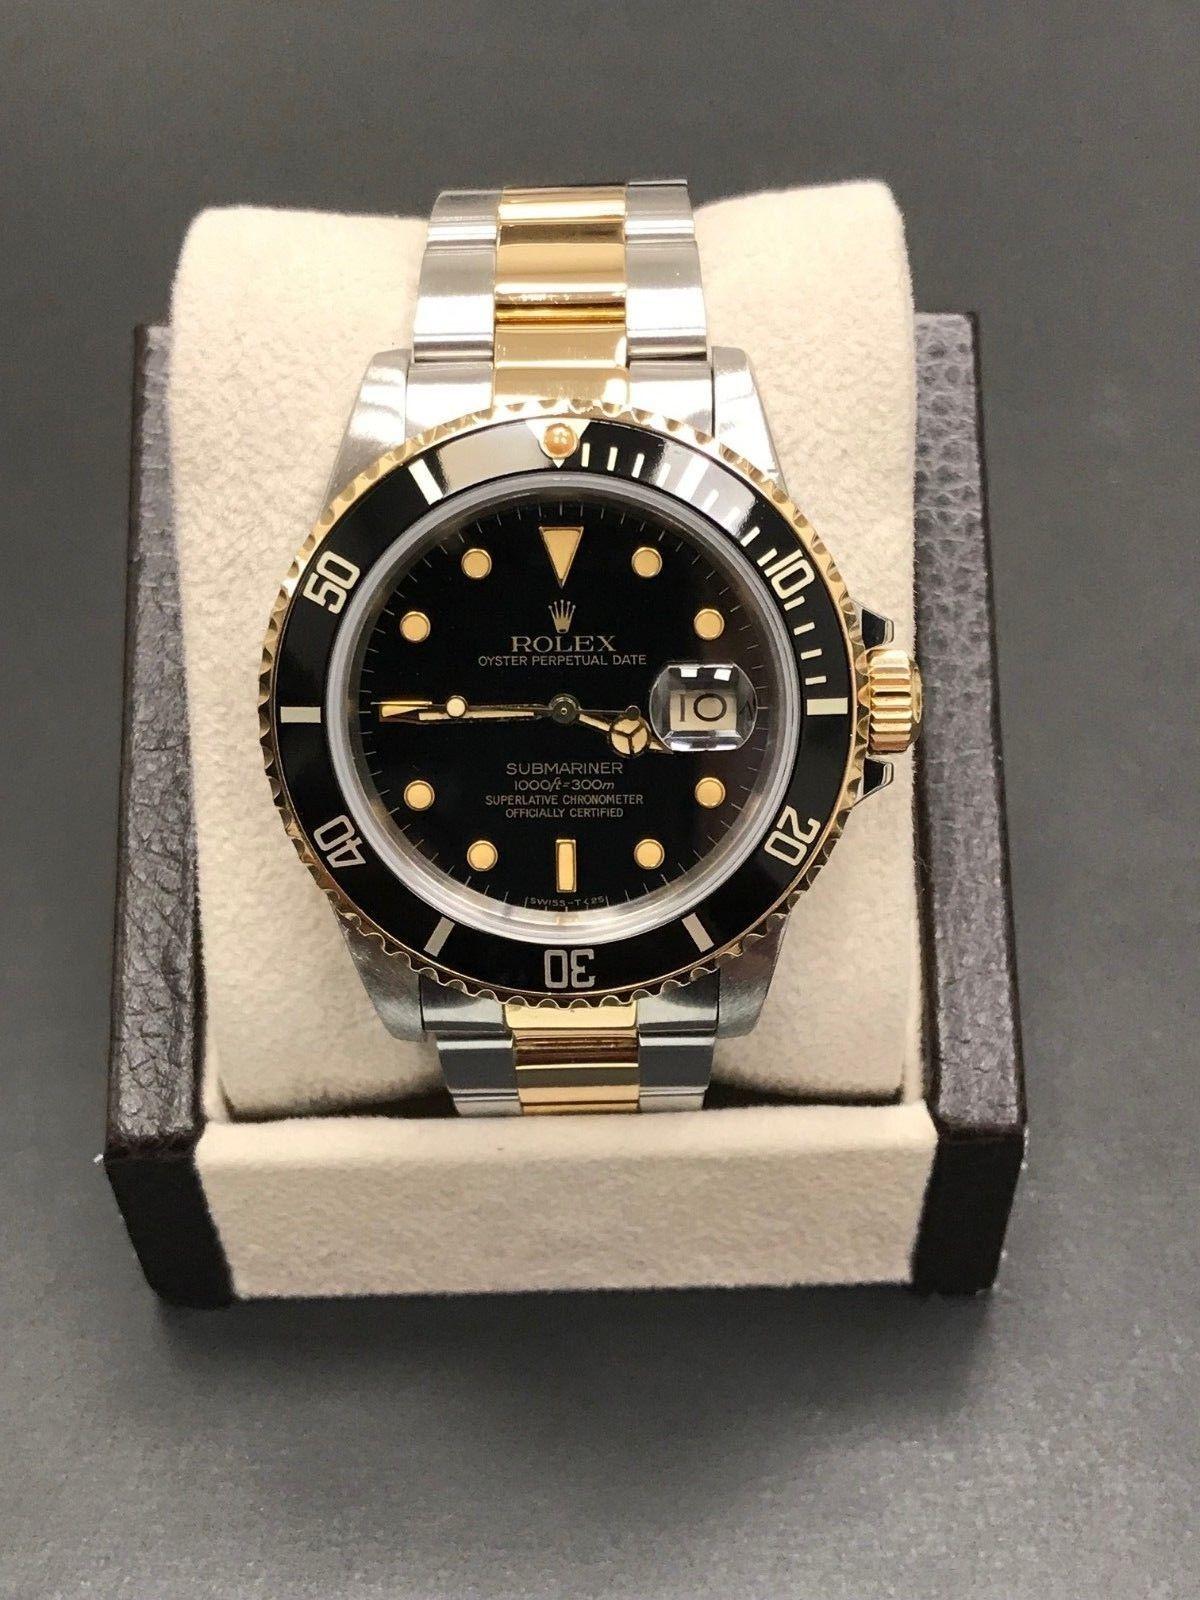 Style Number: 16803
 
Serial: 8510***
 
Year: 1985
 
Model: Submariner 
 
Case Material: Stainless Steel 
 
Band: 18K Yellow Gold & Stainless Steel 
 
Bezel: Black
 
Dial: Black
 
Face: Sapphire Crystal 
 
Case Size: 40mm
 
Includes: 
-Elegant Watch